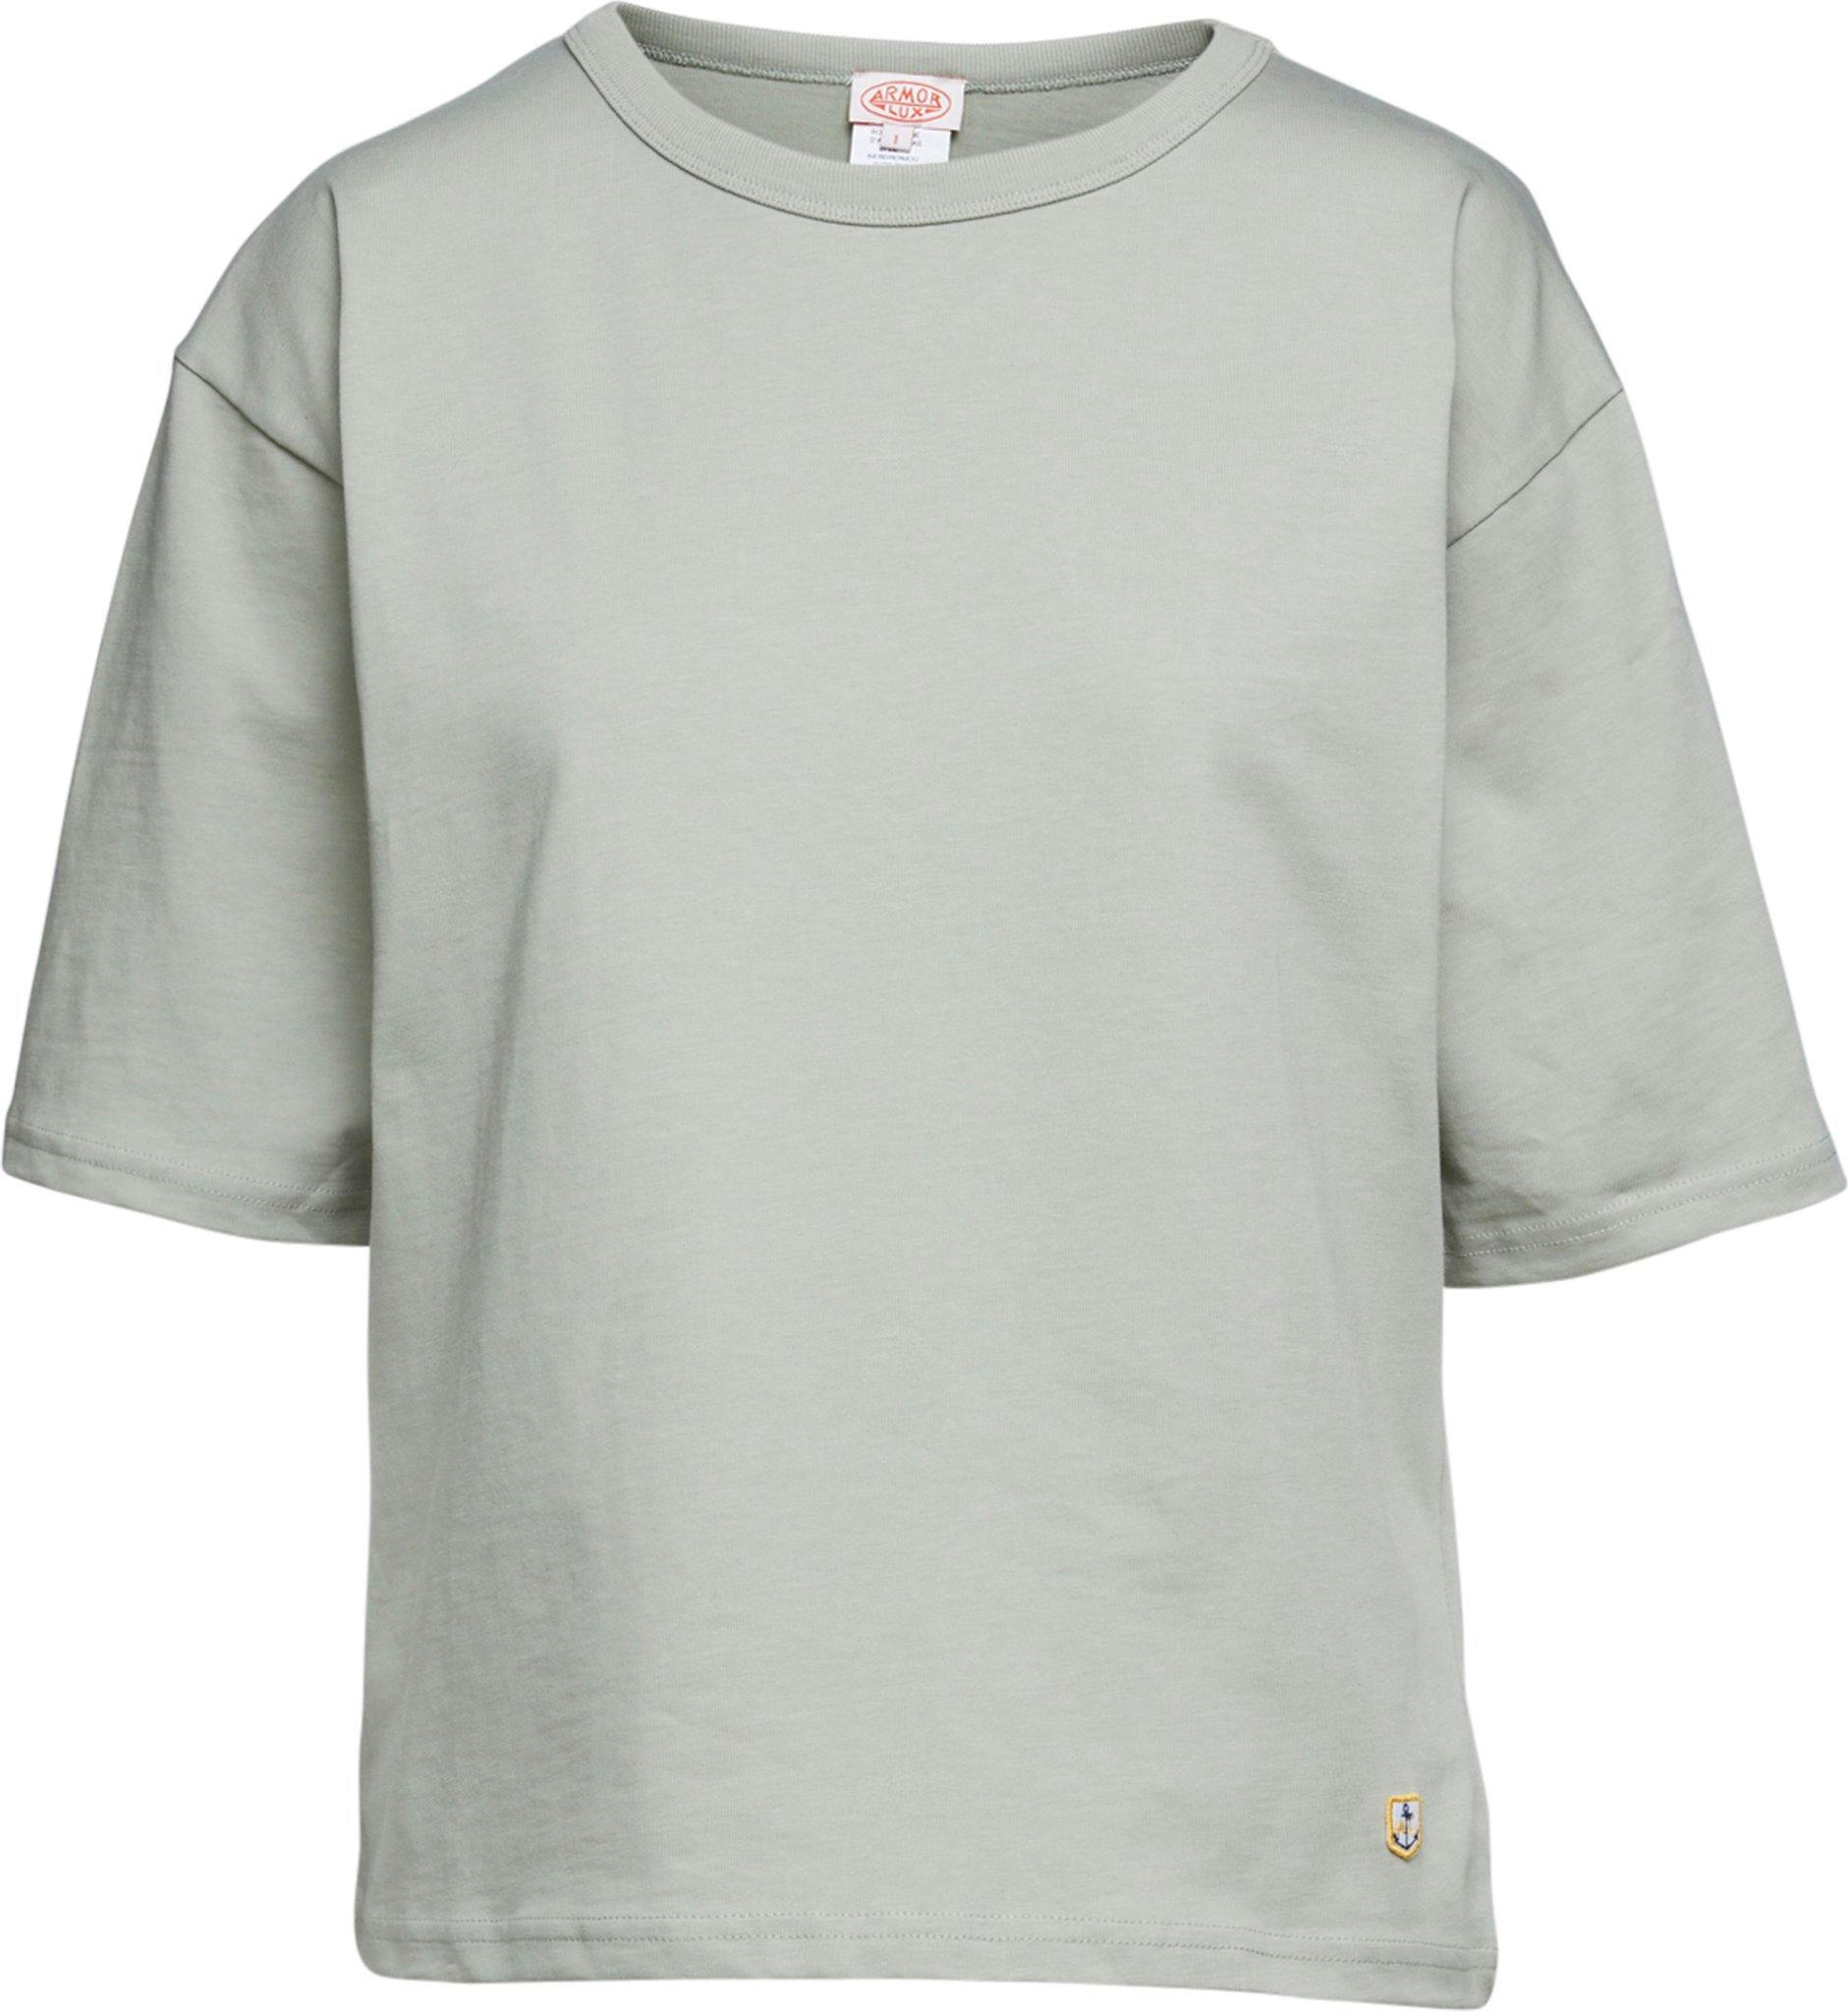 Product image for Héritage Organic Cotton Tee - Women's